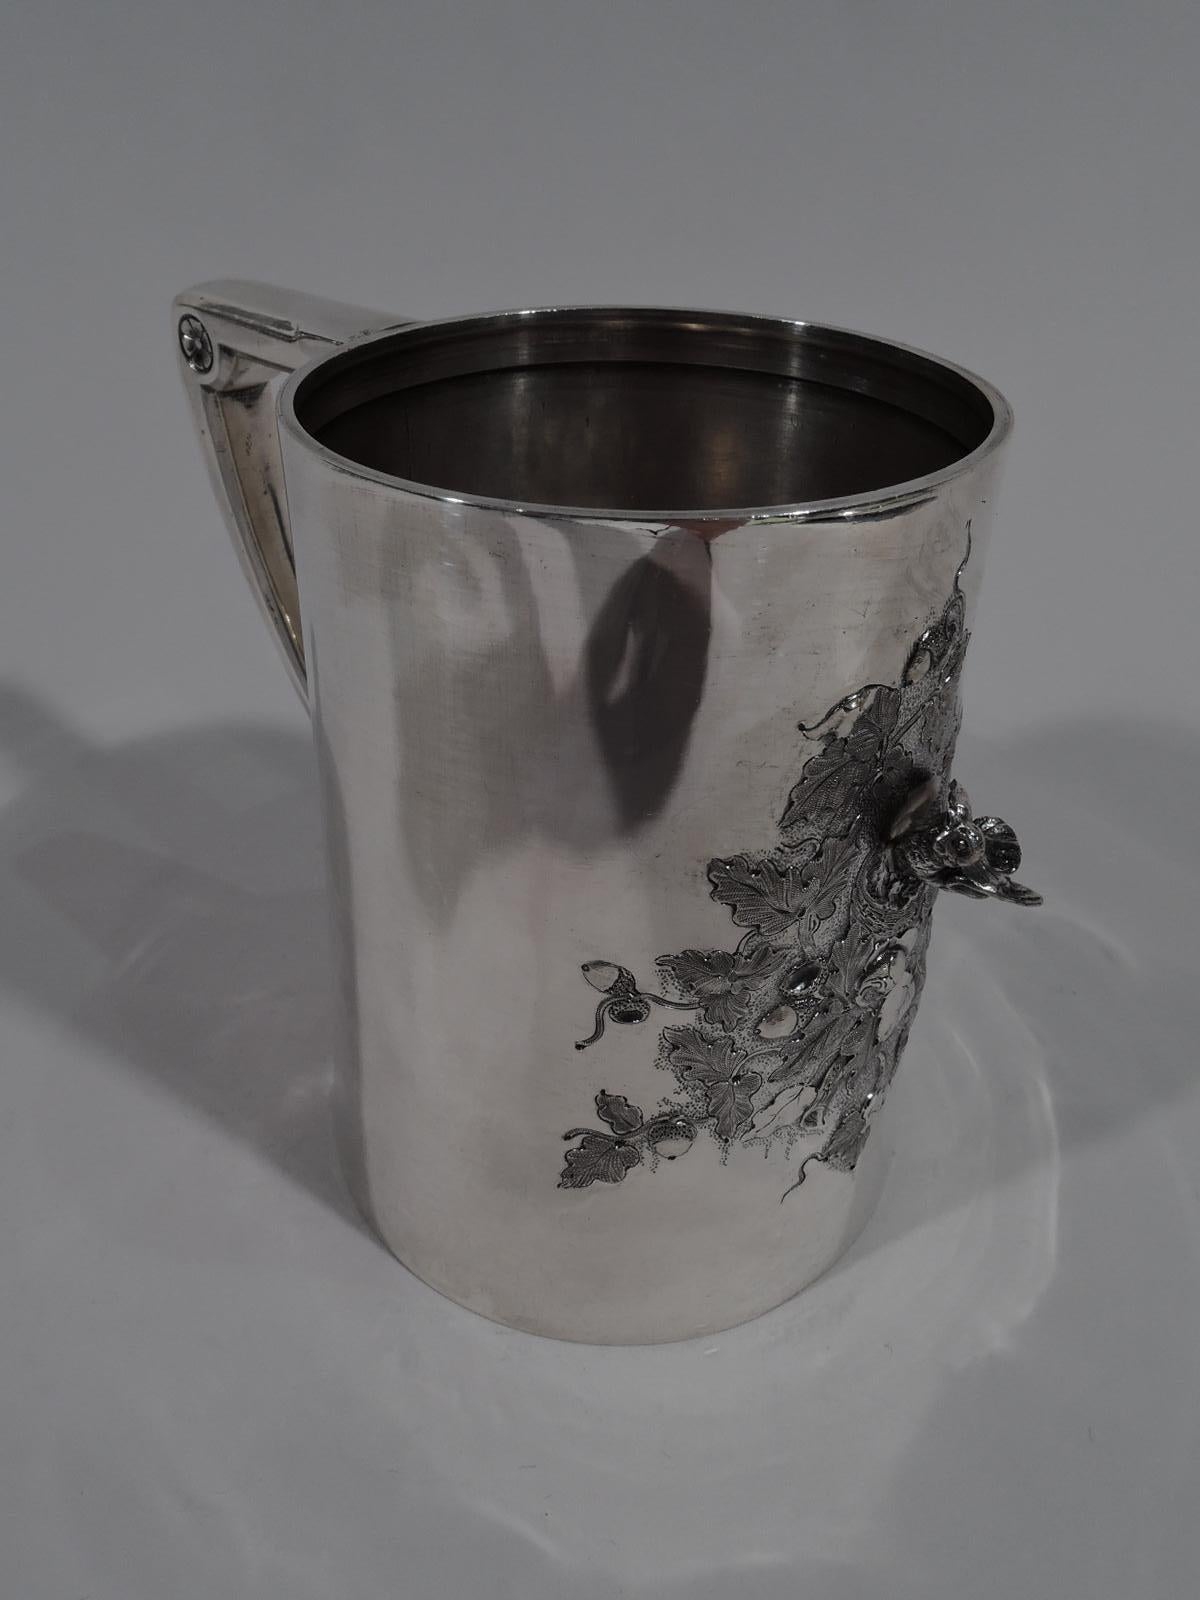 Bird’s nest sterling silver baby cup. Made by Gorham in Providence in 1868. Straight and upward tapering sides, and bracket handle. On front is cast figure of nesting bird mounted to chased and engraved irregular ground with leaves and acorns. A